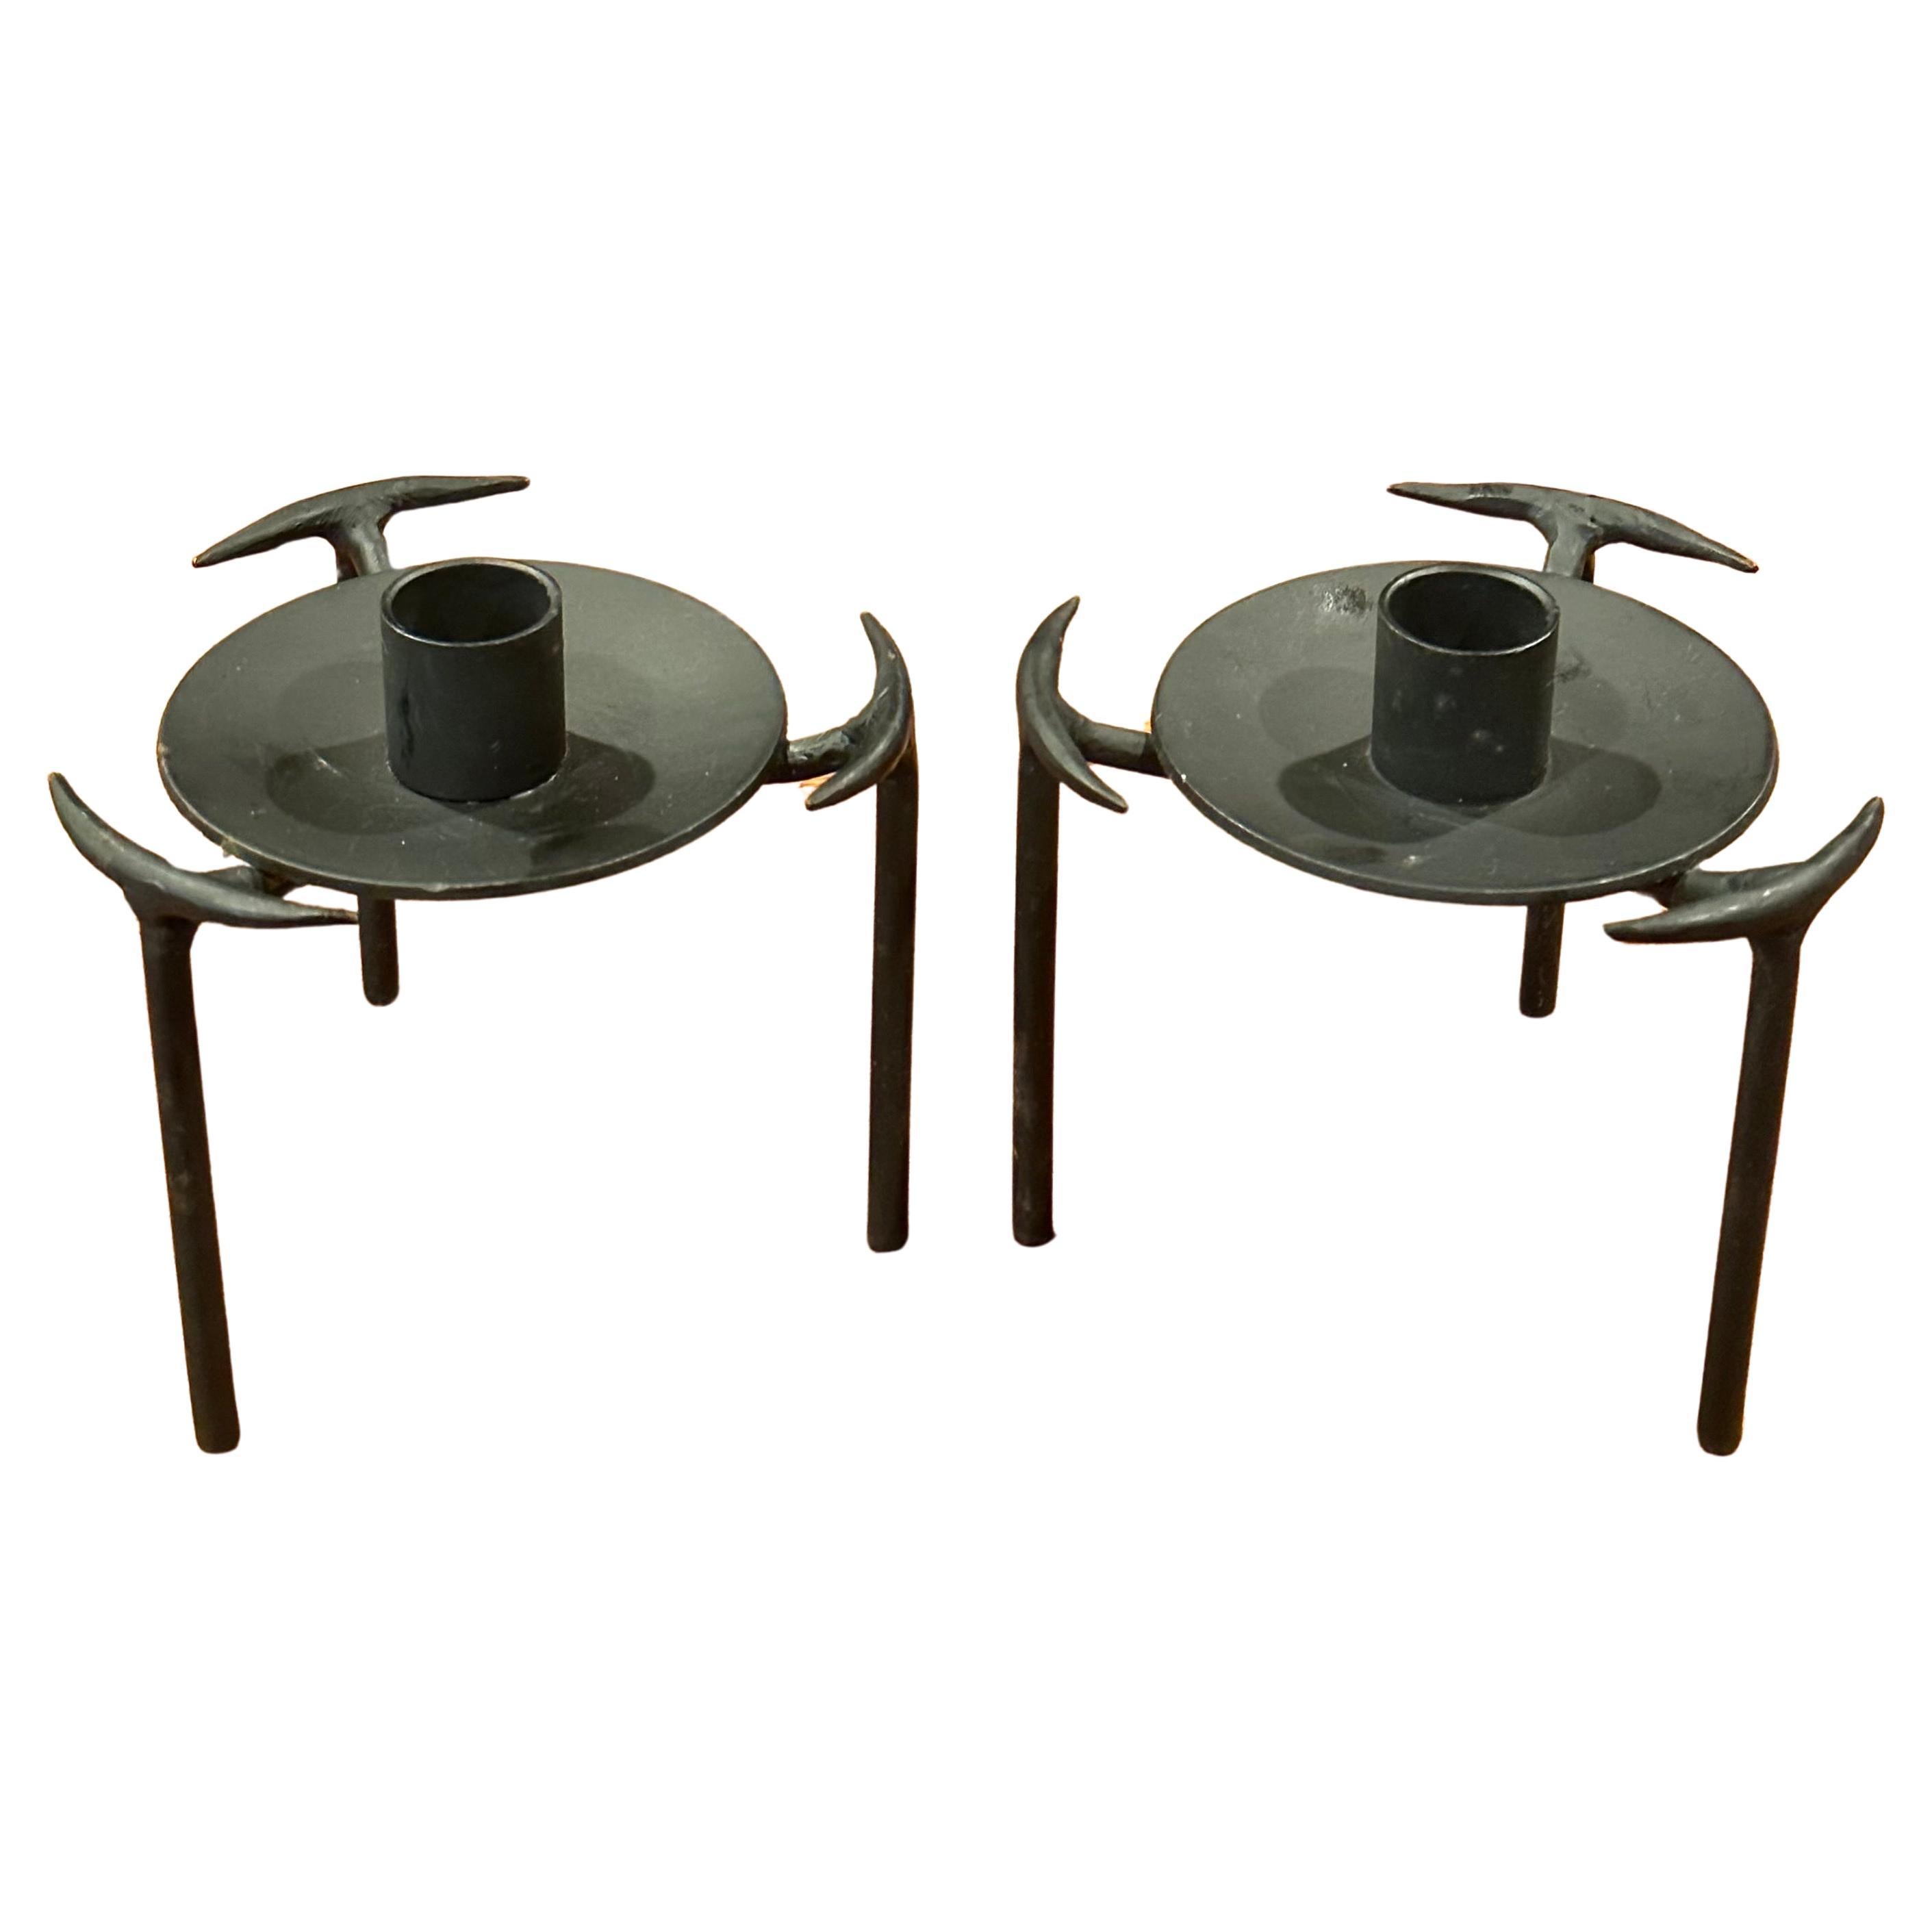 Pair of Modernist Cut Steel Candle Holders For Sale